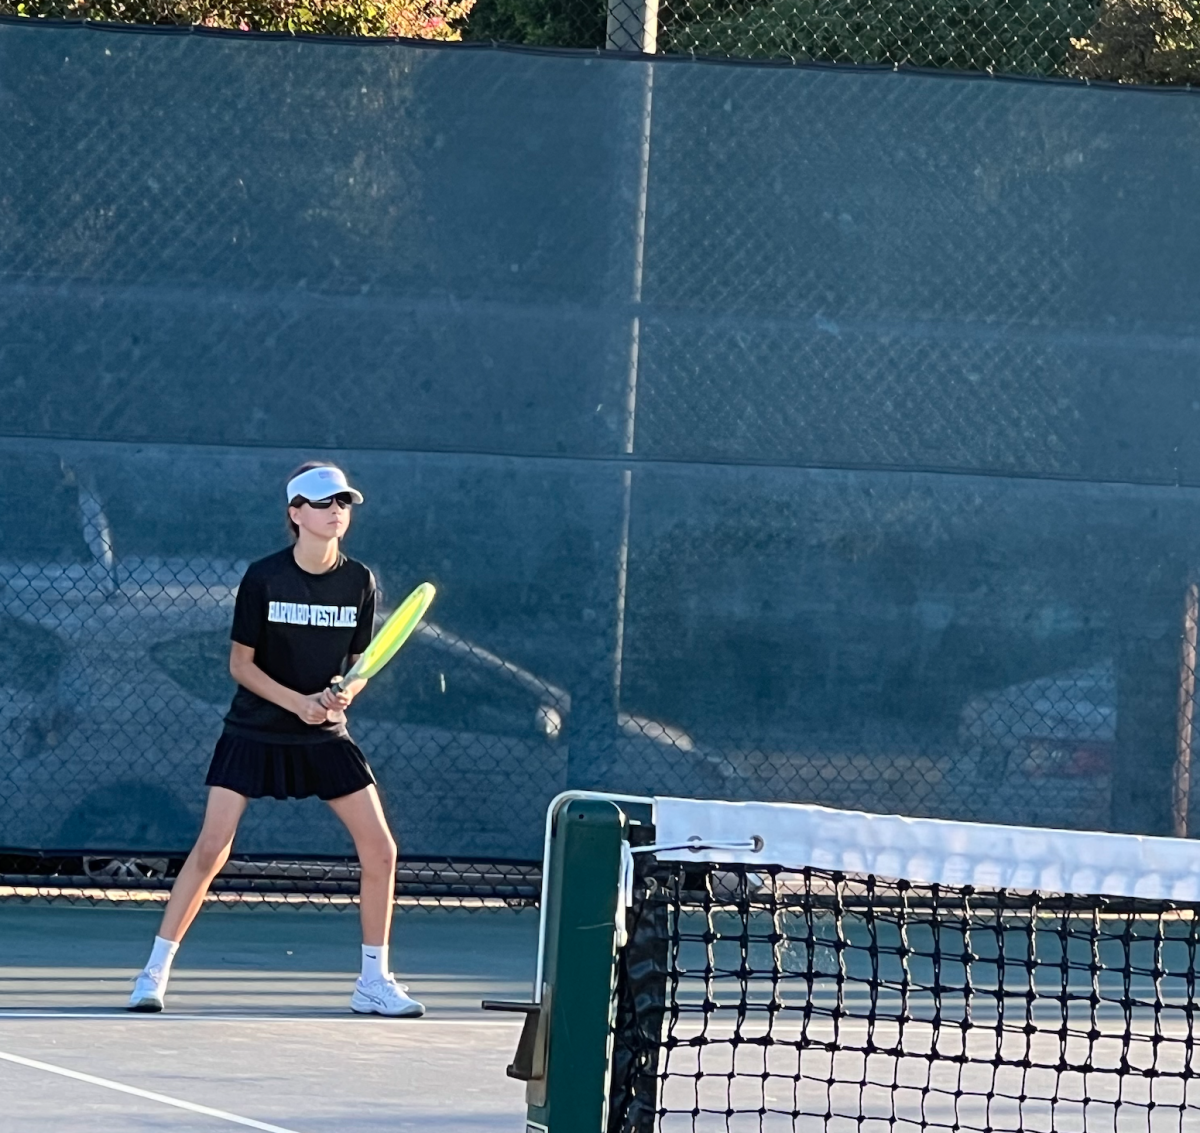 Brooklyn Caras playing tennis against opponent, Paul Revere.